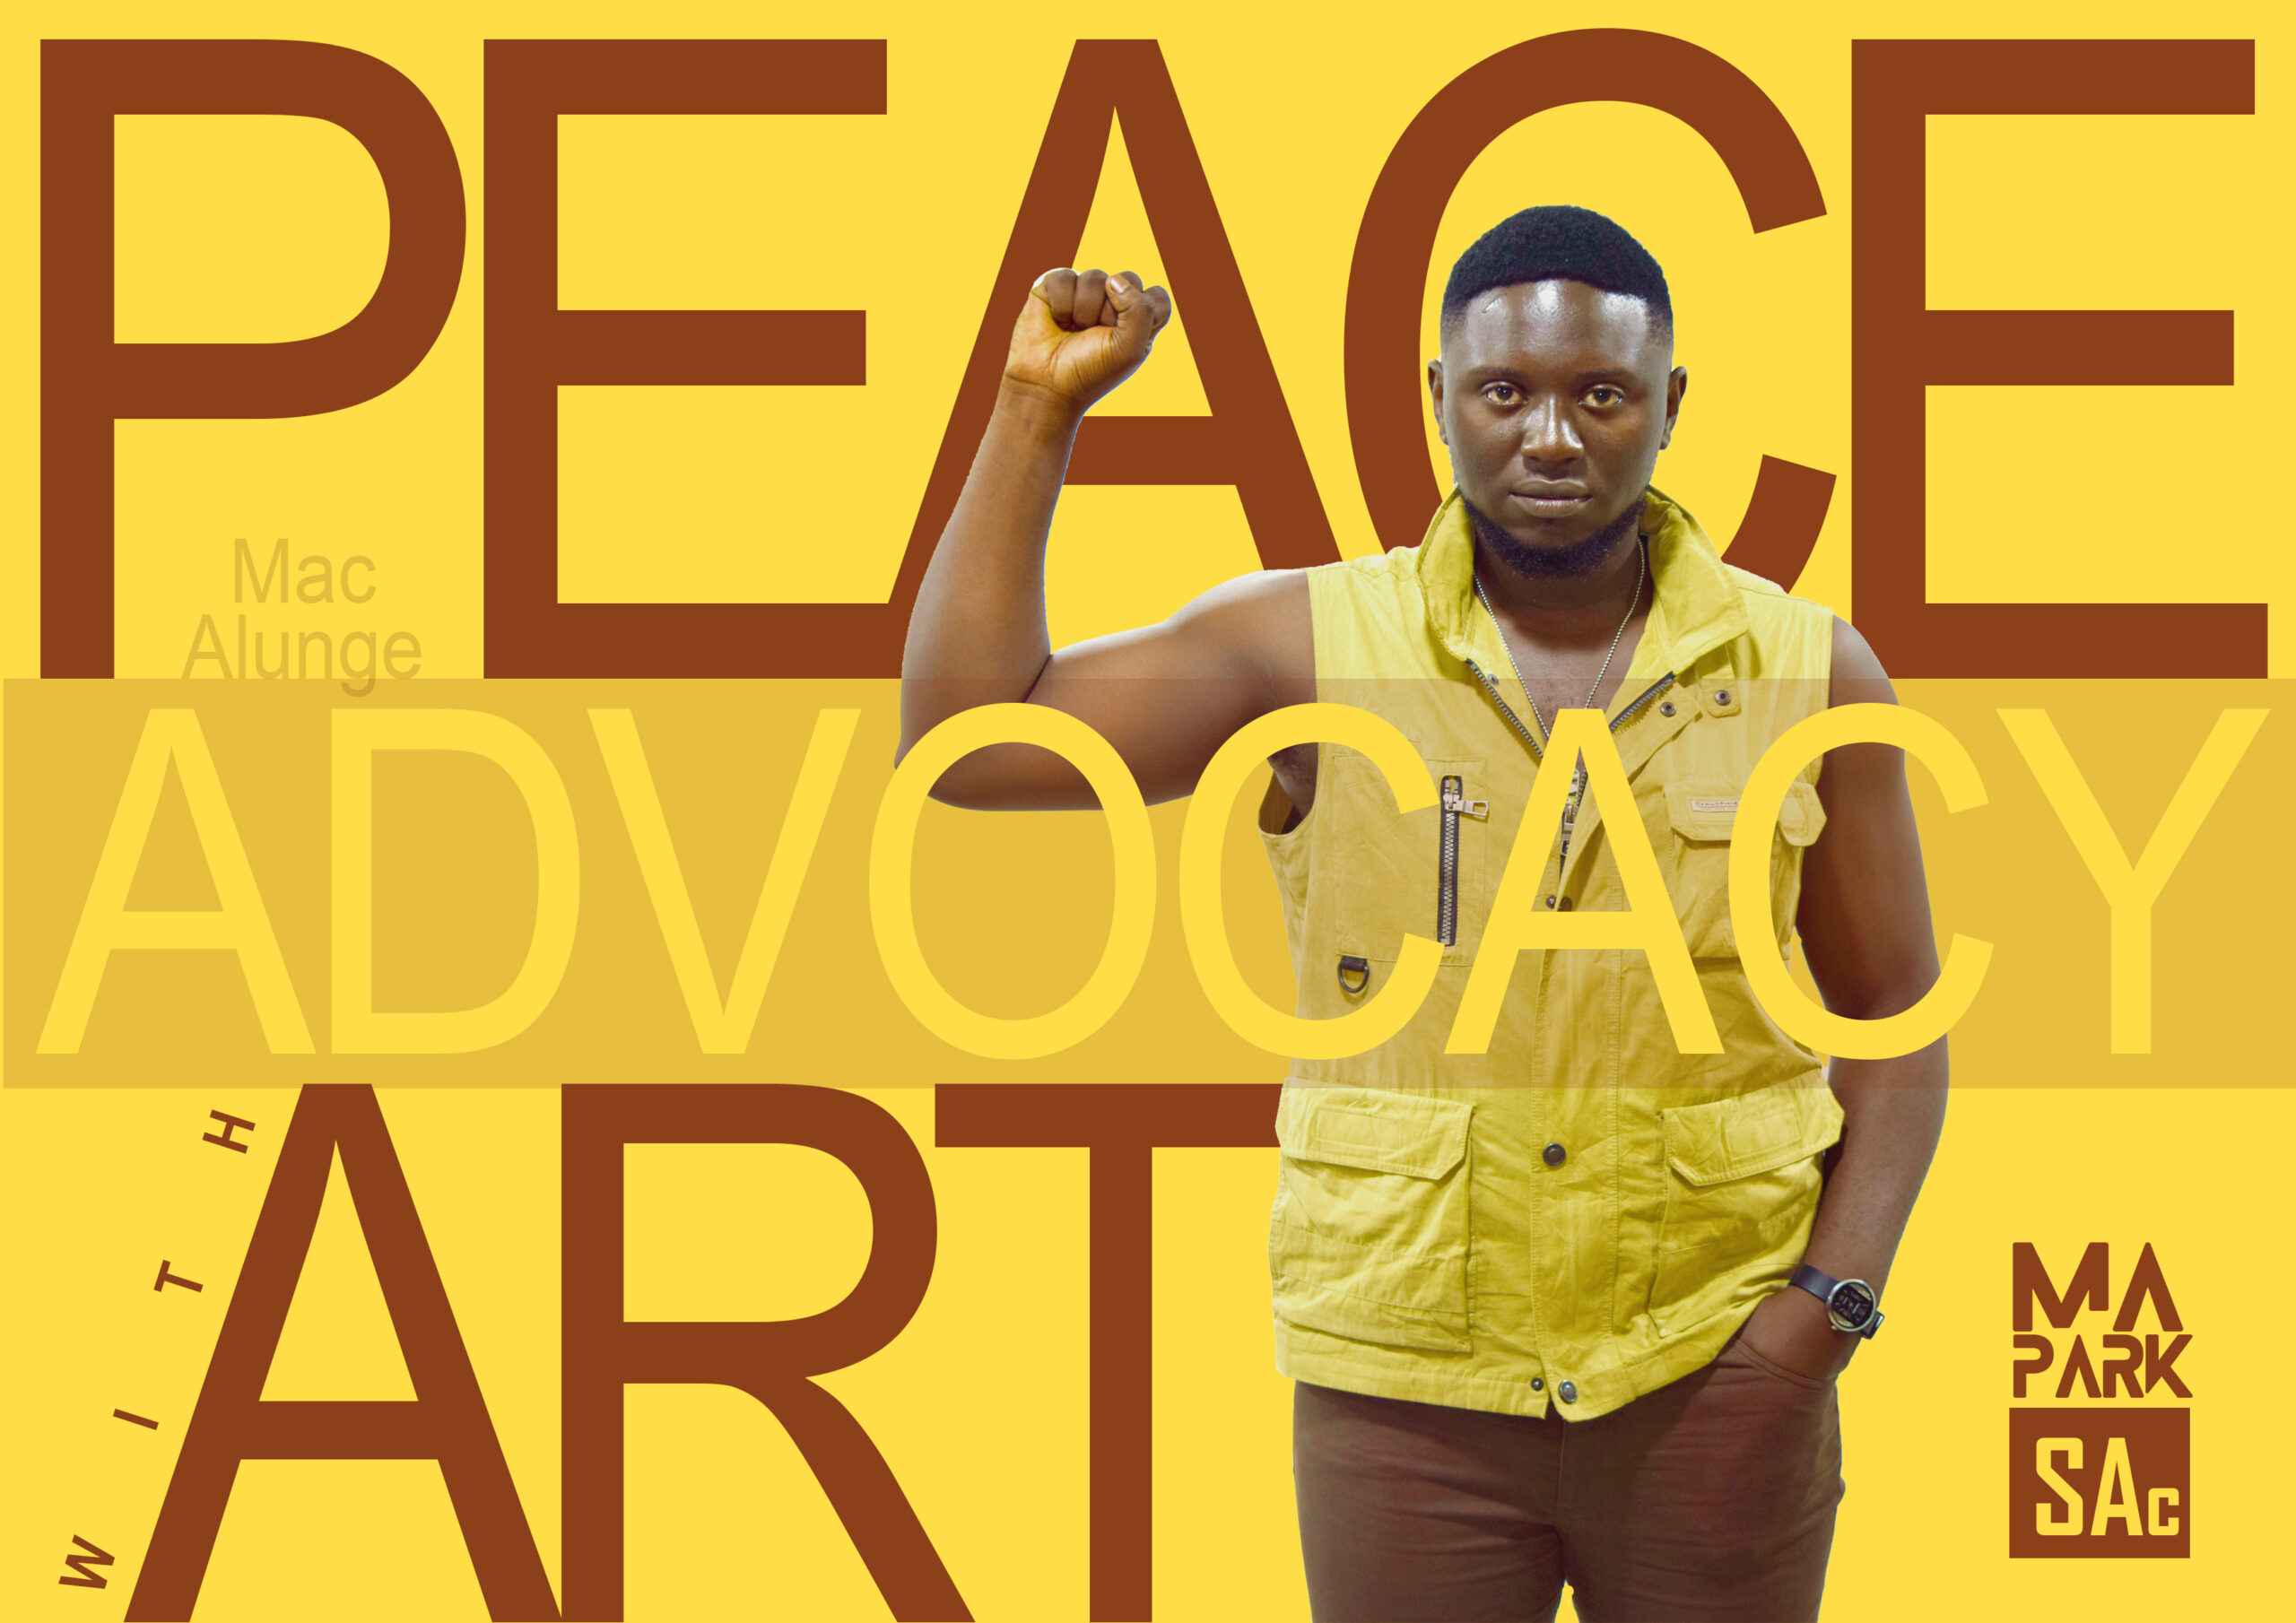 Mac Alunge Peace Advocacy with art